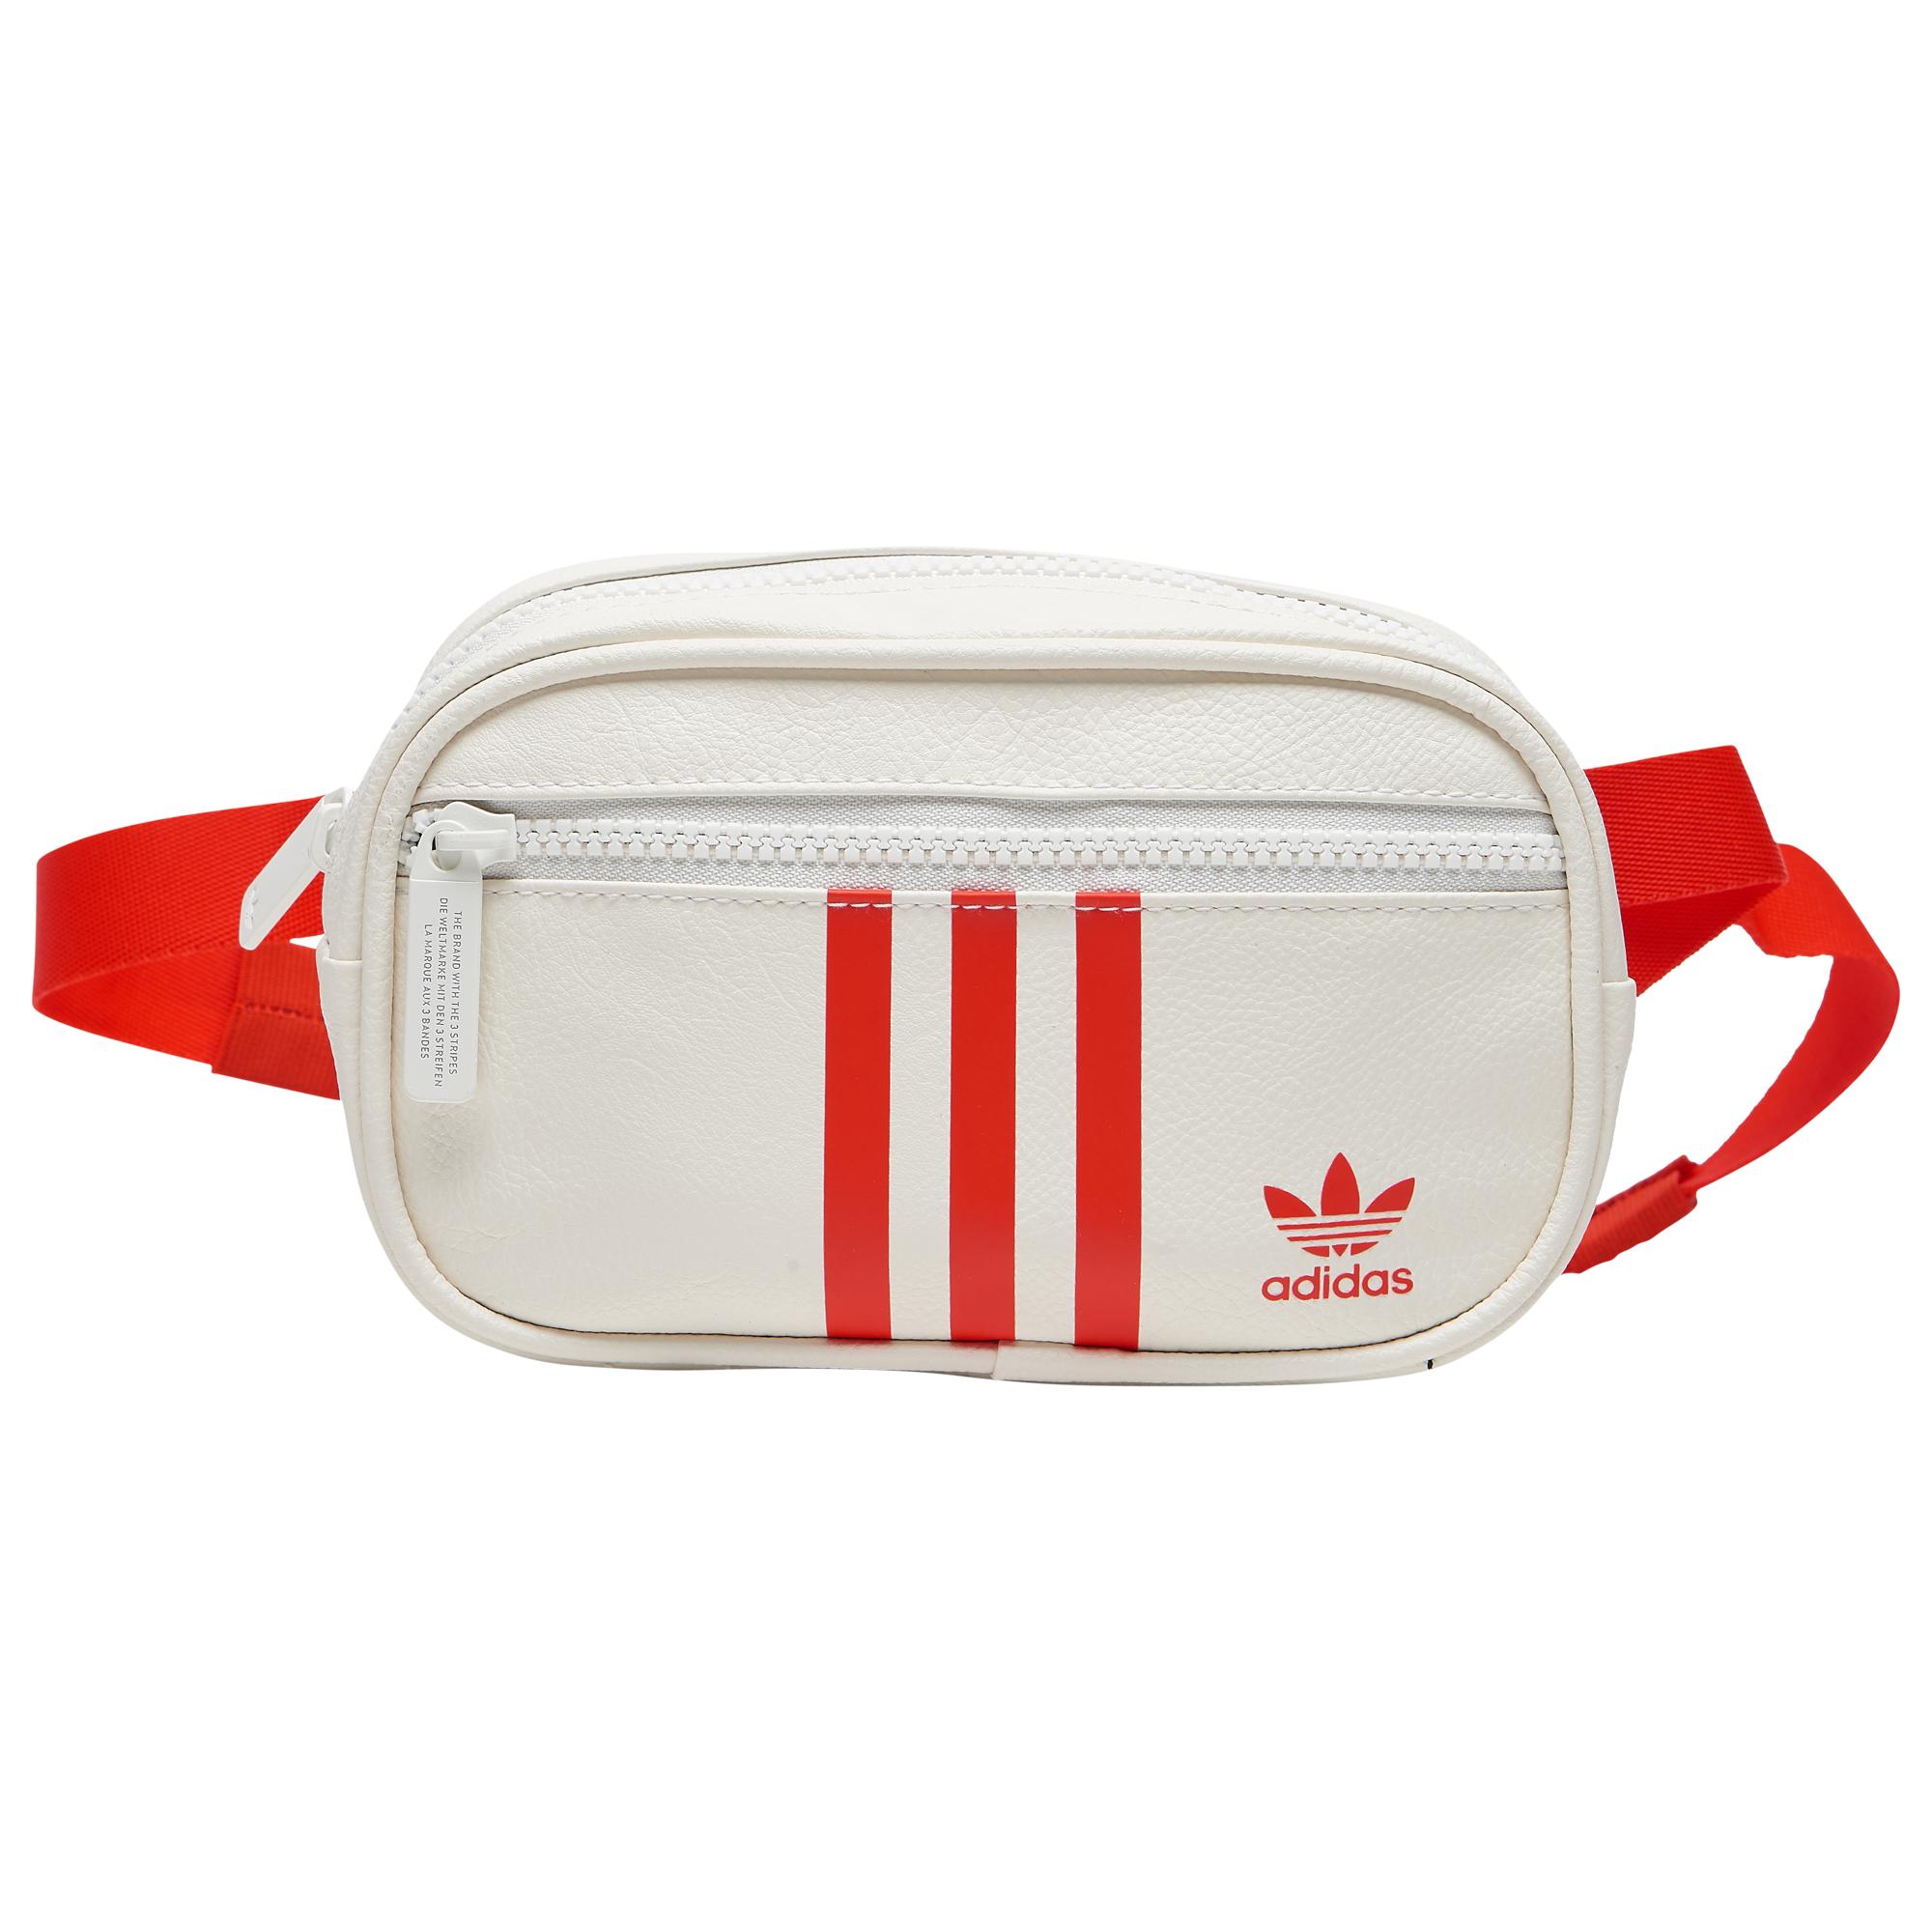 adidas Originals Pu Leather Vday Waist Pack Bag in White / Red (Red) for  Men - Lyst